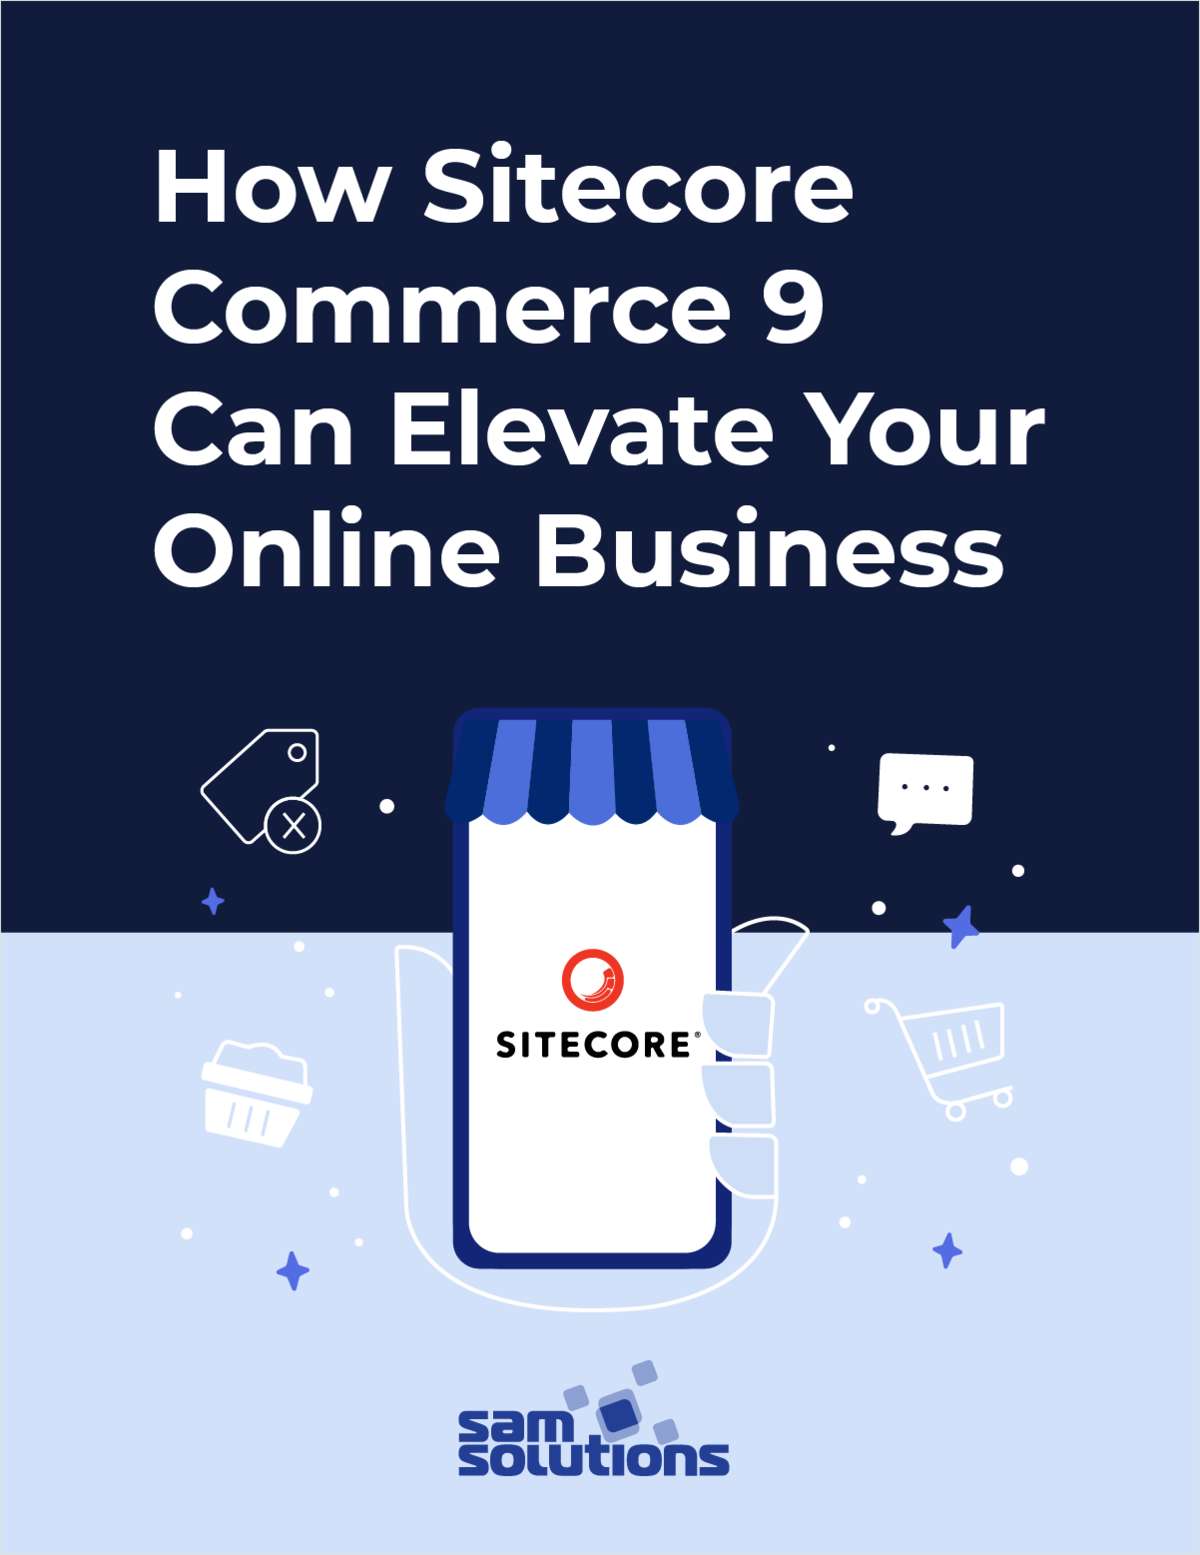 How Sitecore Commerce 9 Can Elevate Your Online Business